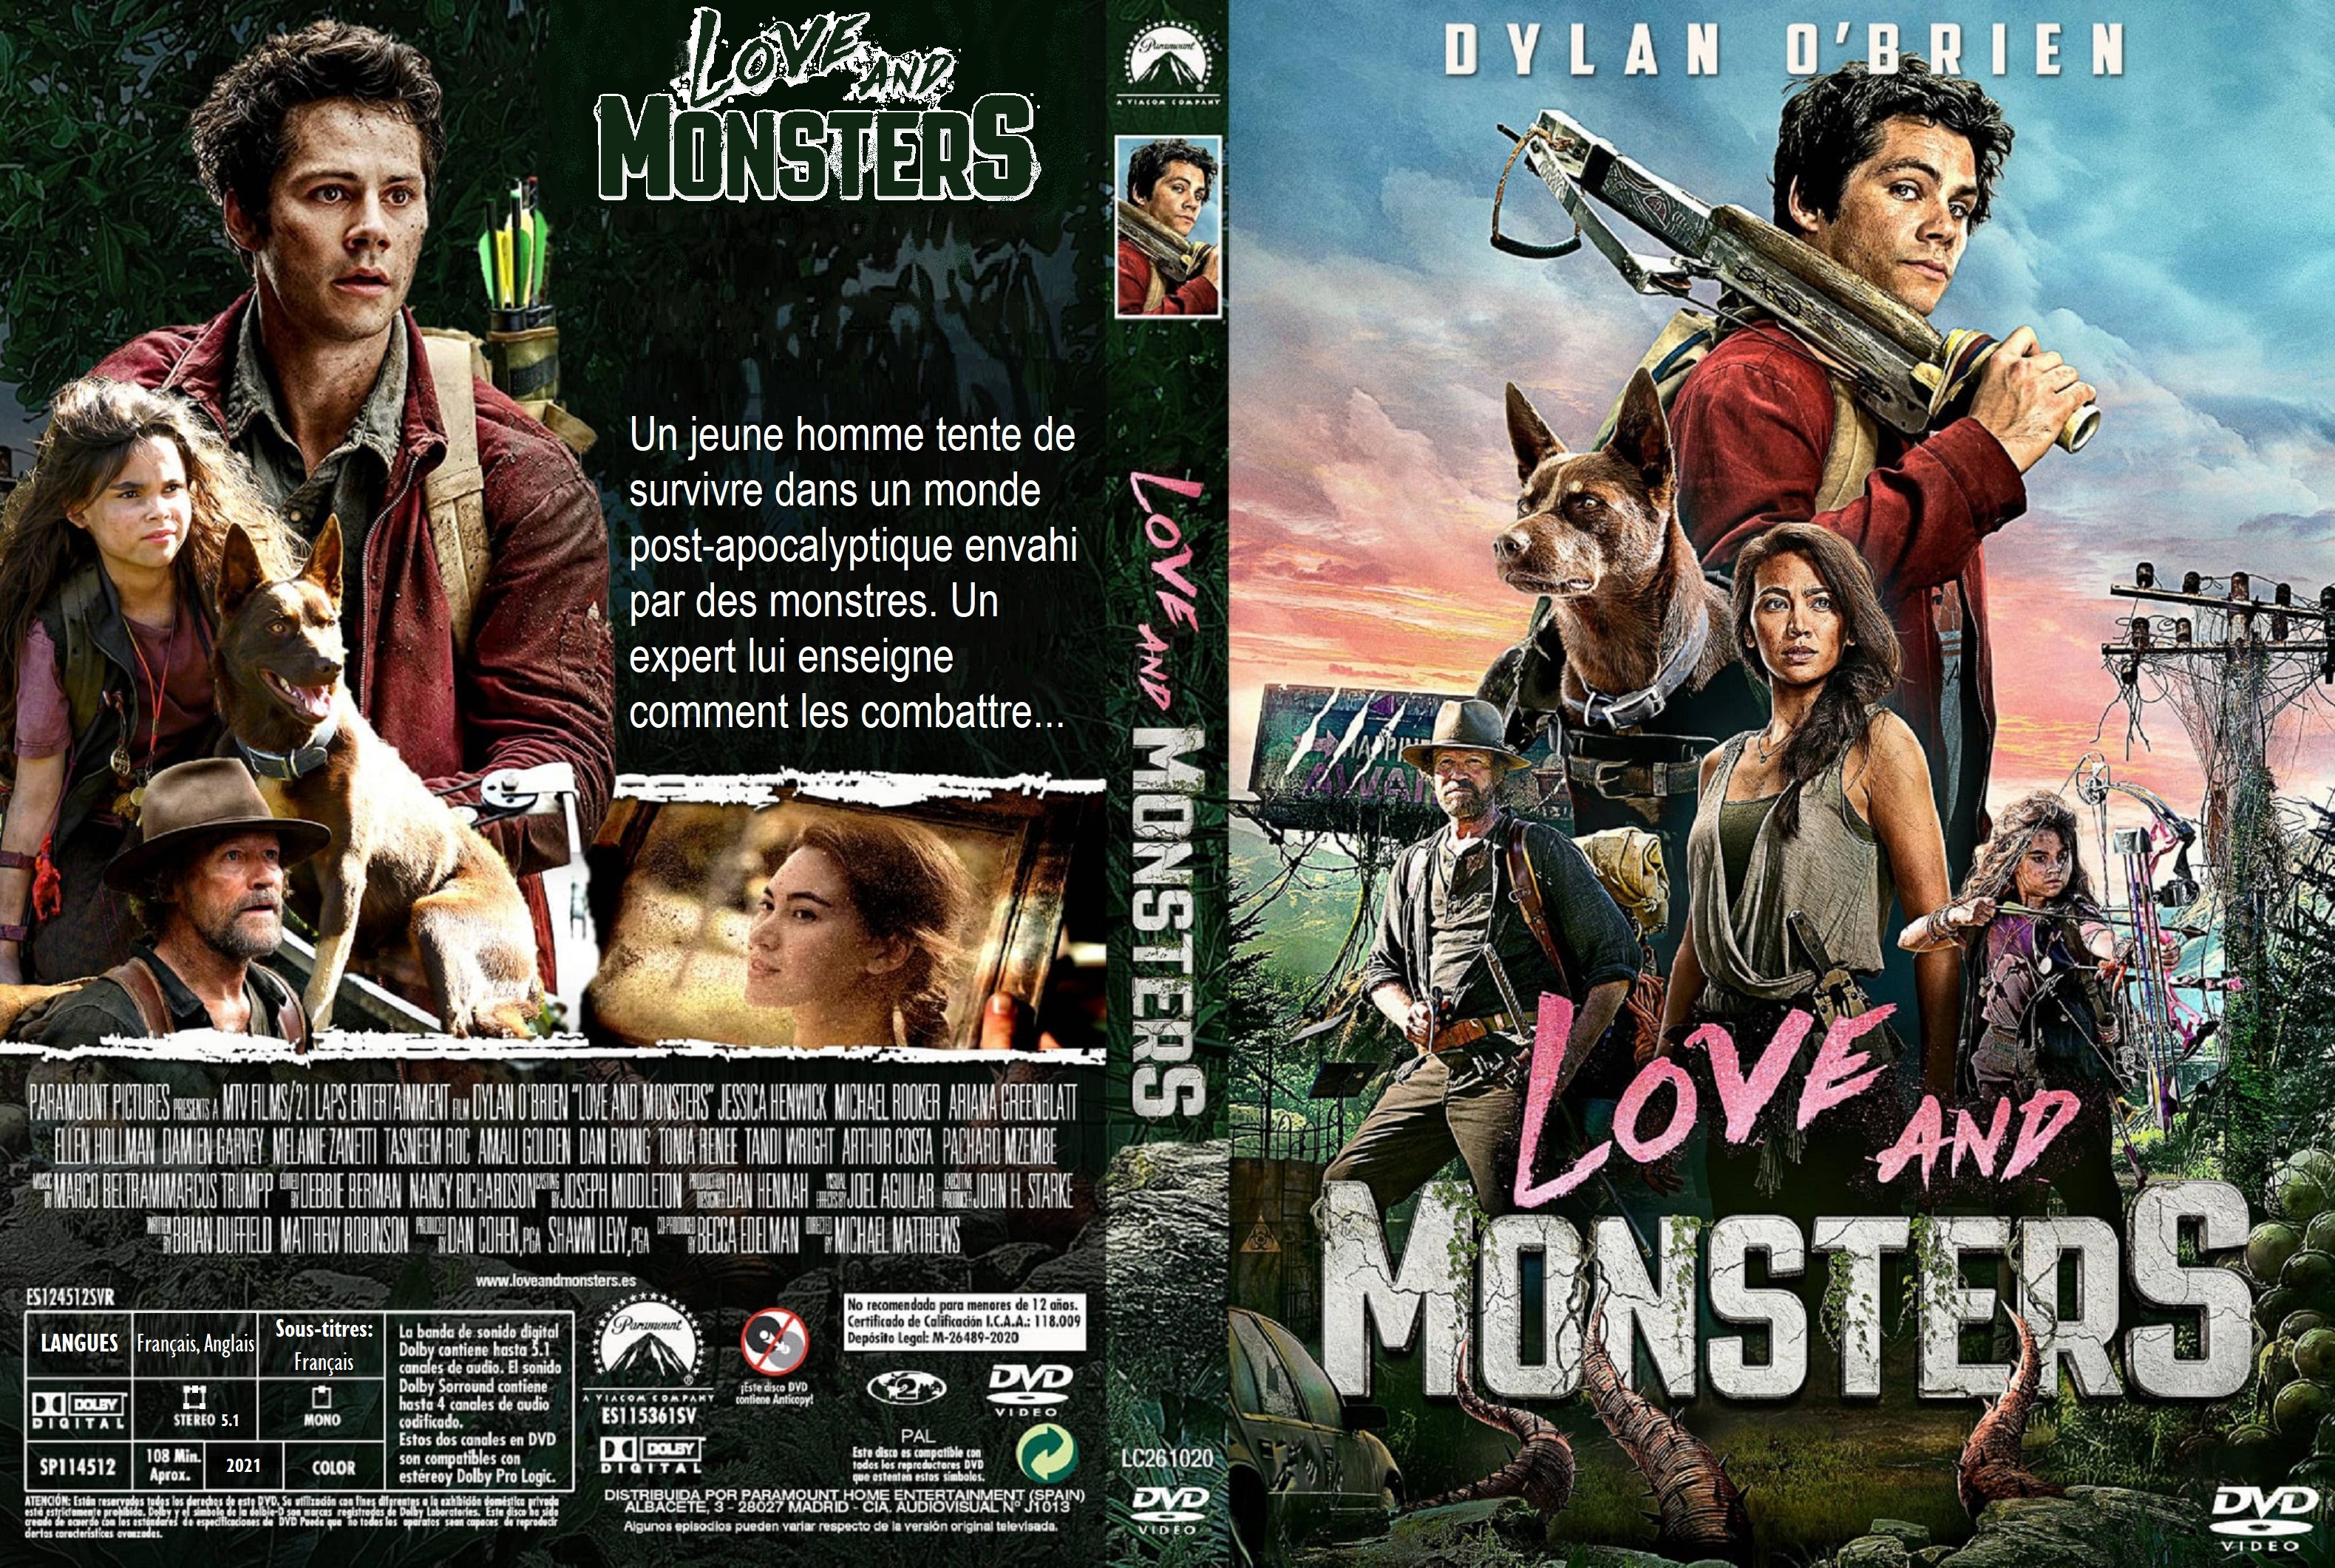 Jaquette DVD Love and Monsters custom v2